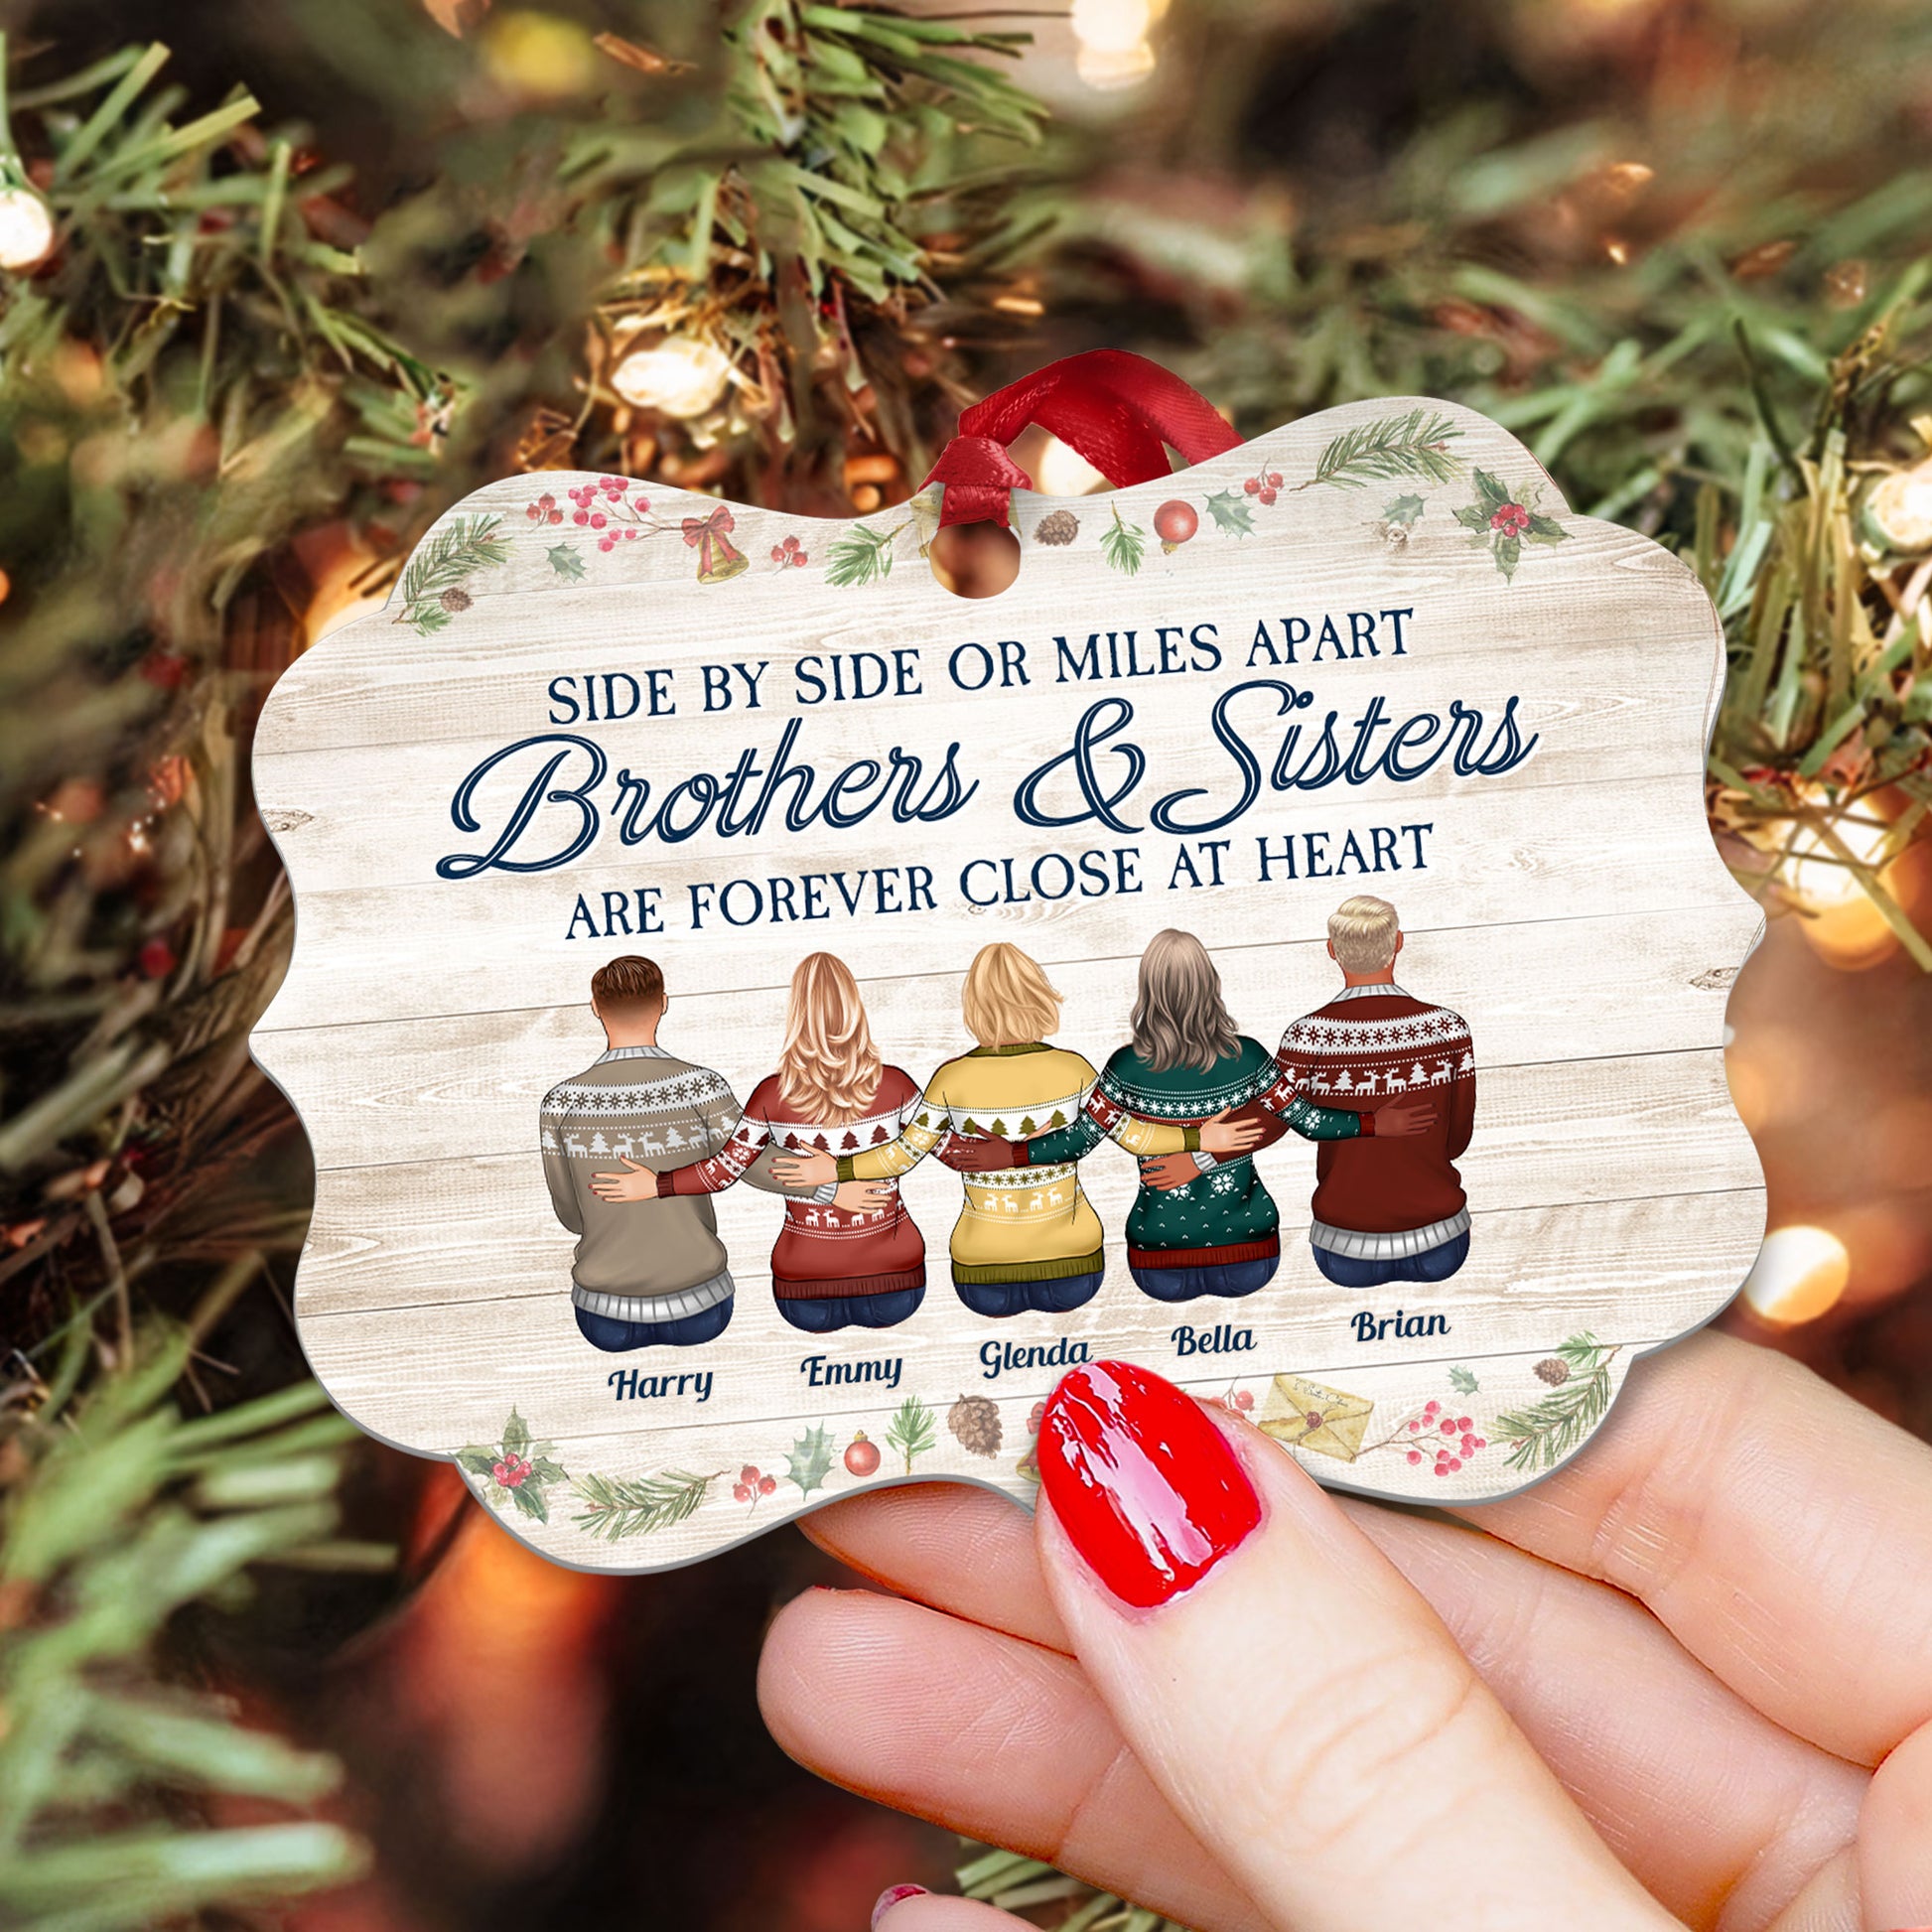 Brothers & Sisters Are Forever Close At Heart - Personalized Aluminum Ornament - Christmas Gift Family Ornament For Dad, Mom, Brothers, Sisters - Family Hugging